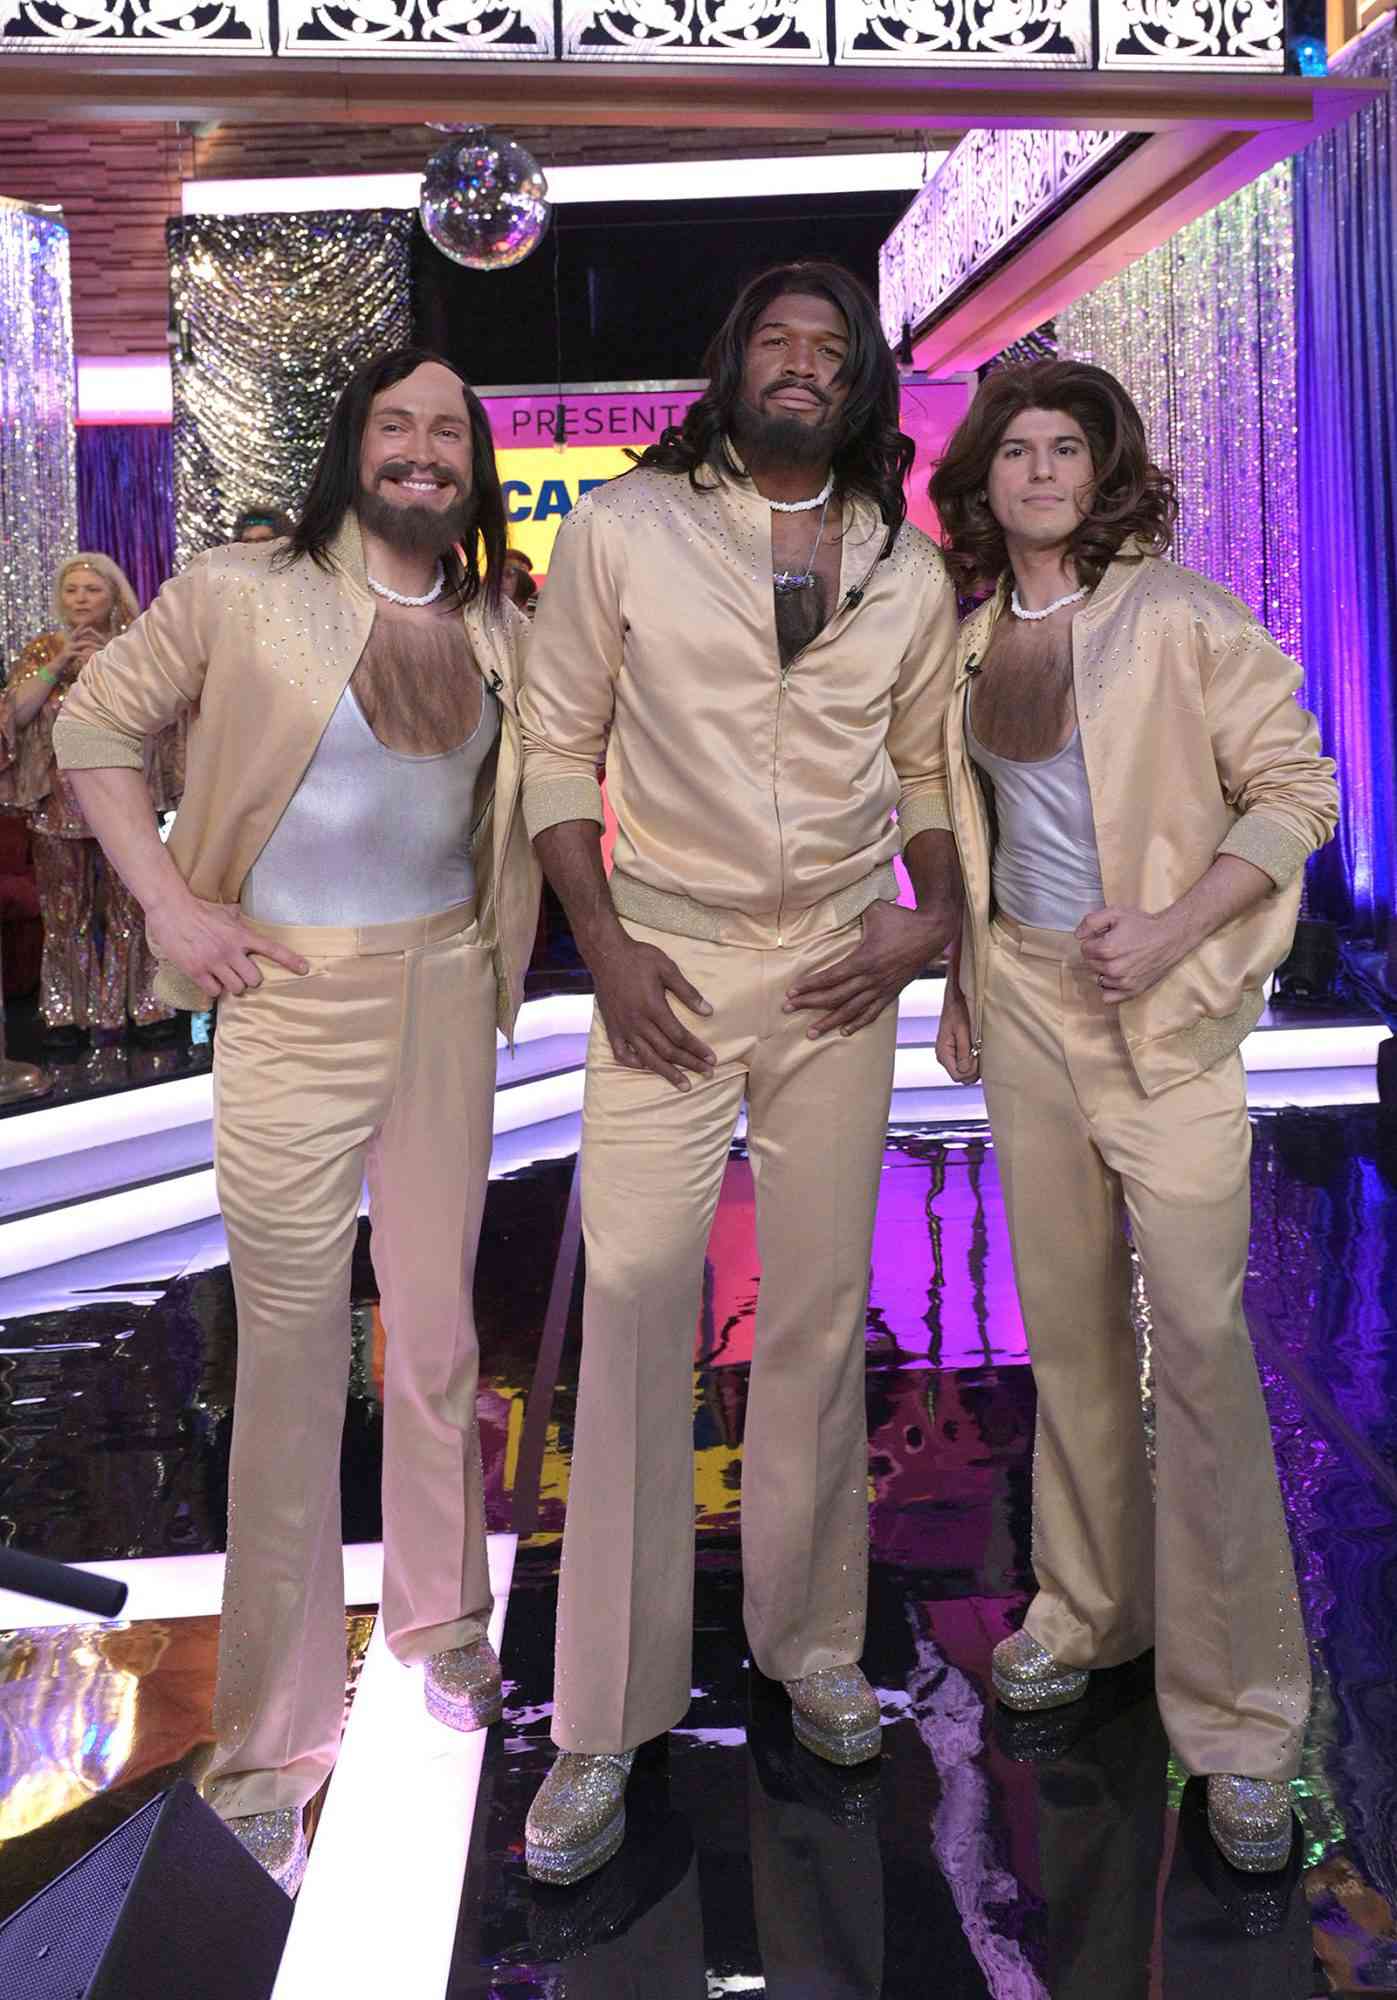 Good Morning America Halloween Robin Roberts (Donna Summer) and Michael Strahan (The Bee Gees) boogied with Lara Spencer (Liza Minnelli), Ginger Zee (Olivia Newton-John) Amy Robach (Cher), Sara Haines (Sonny), Sam Champion (The Village People), Whit Johnson and Gio Benitez (The Bee Gees)